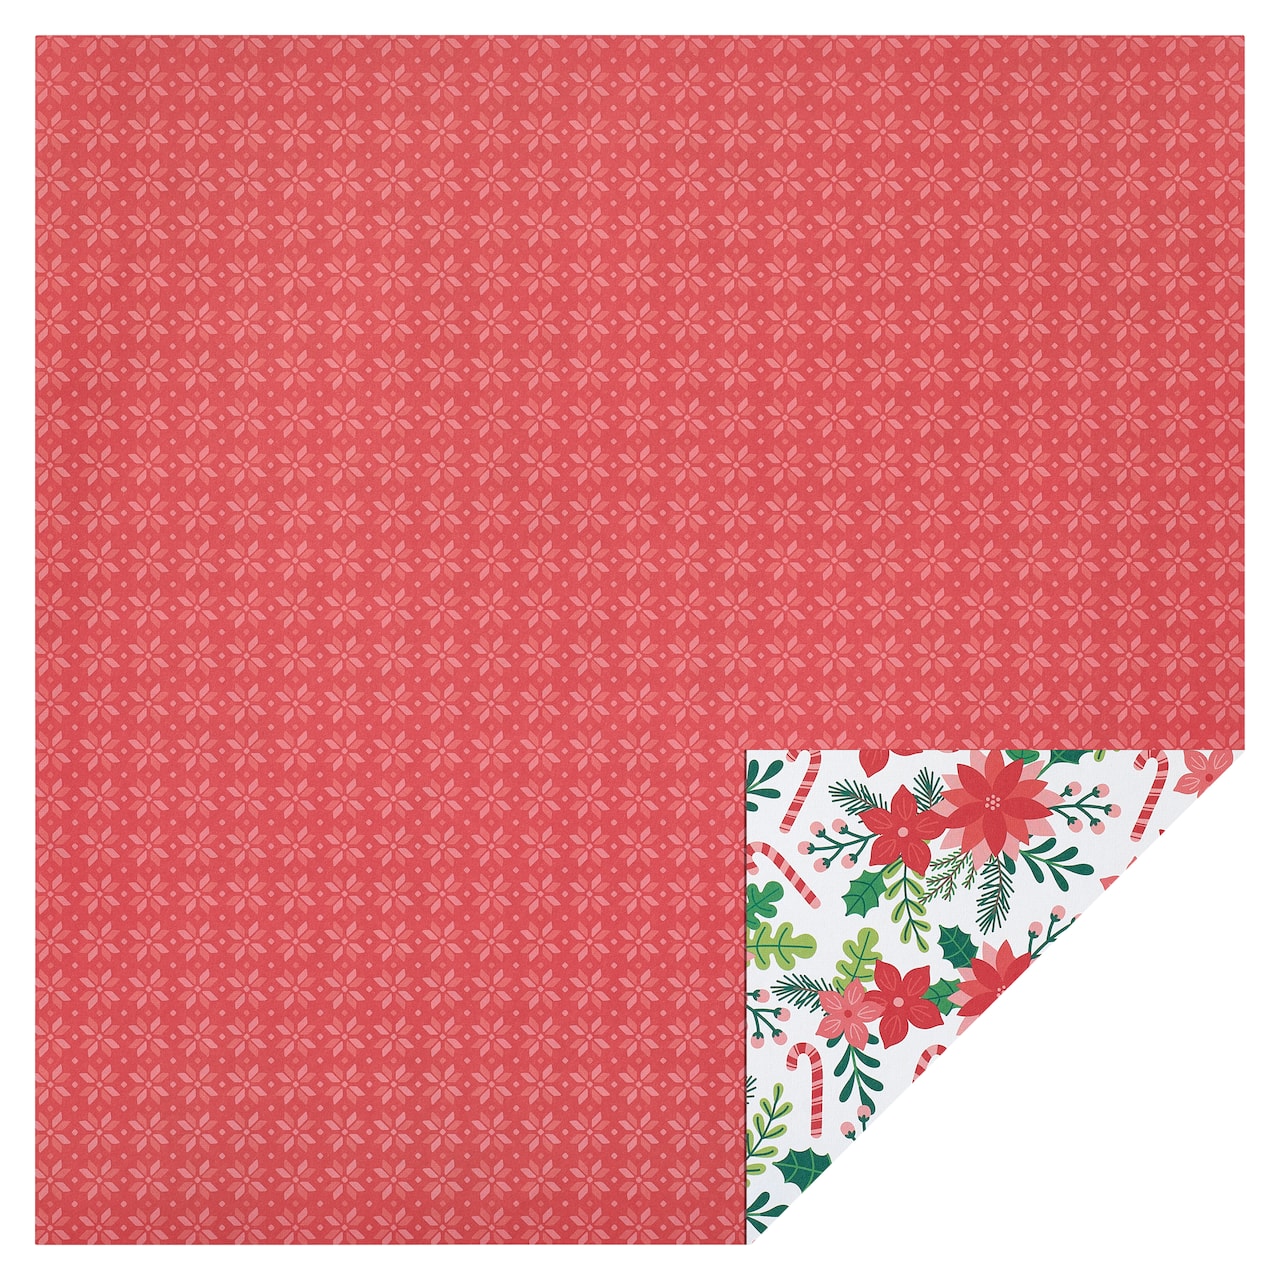 Cozy Christmas Double-Sided Cardstock Paper by Recollections™, 12 x 12